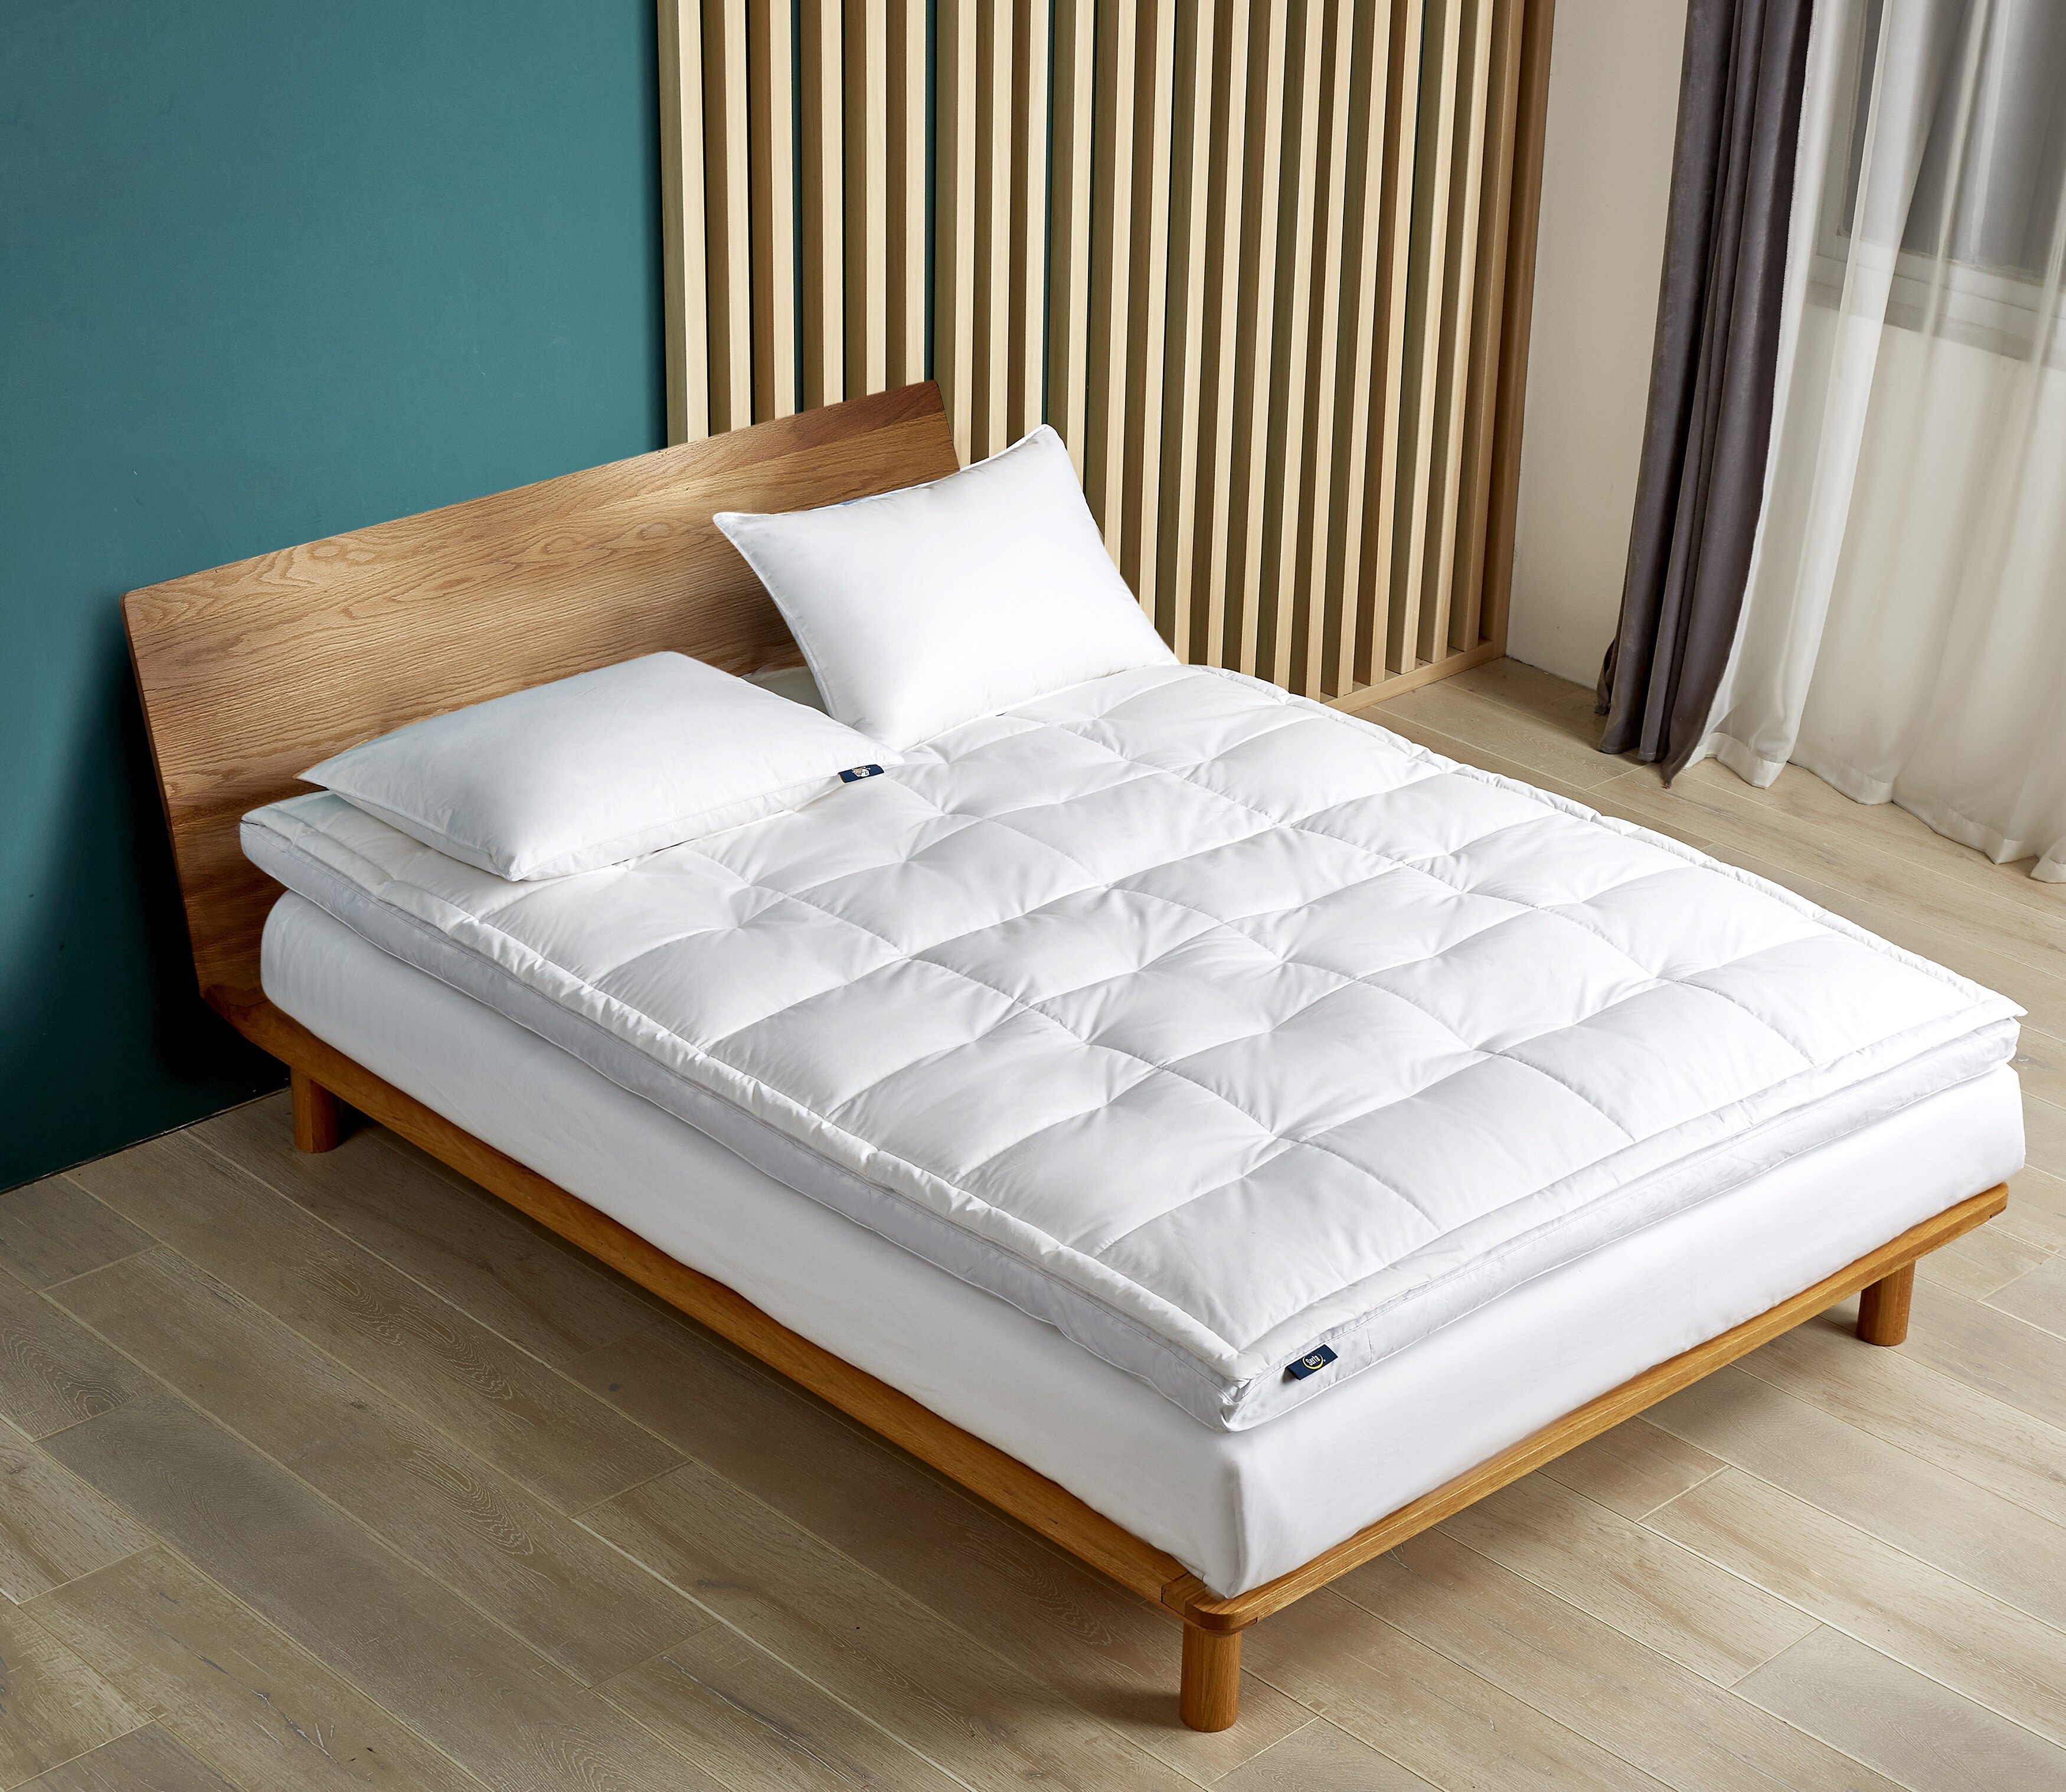 Details about   5" Down Mattress Topper Natural Feather Bed CAL KING Soft Pillow Top 100% Cotton 